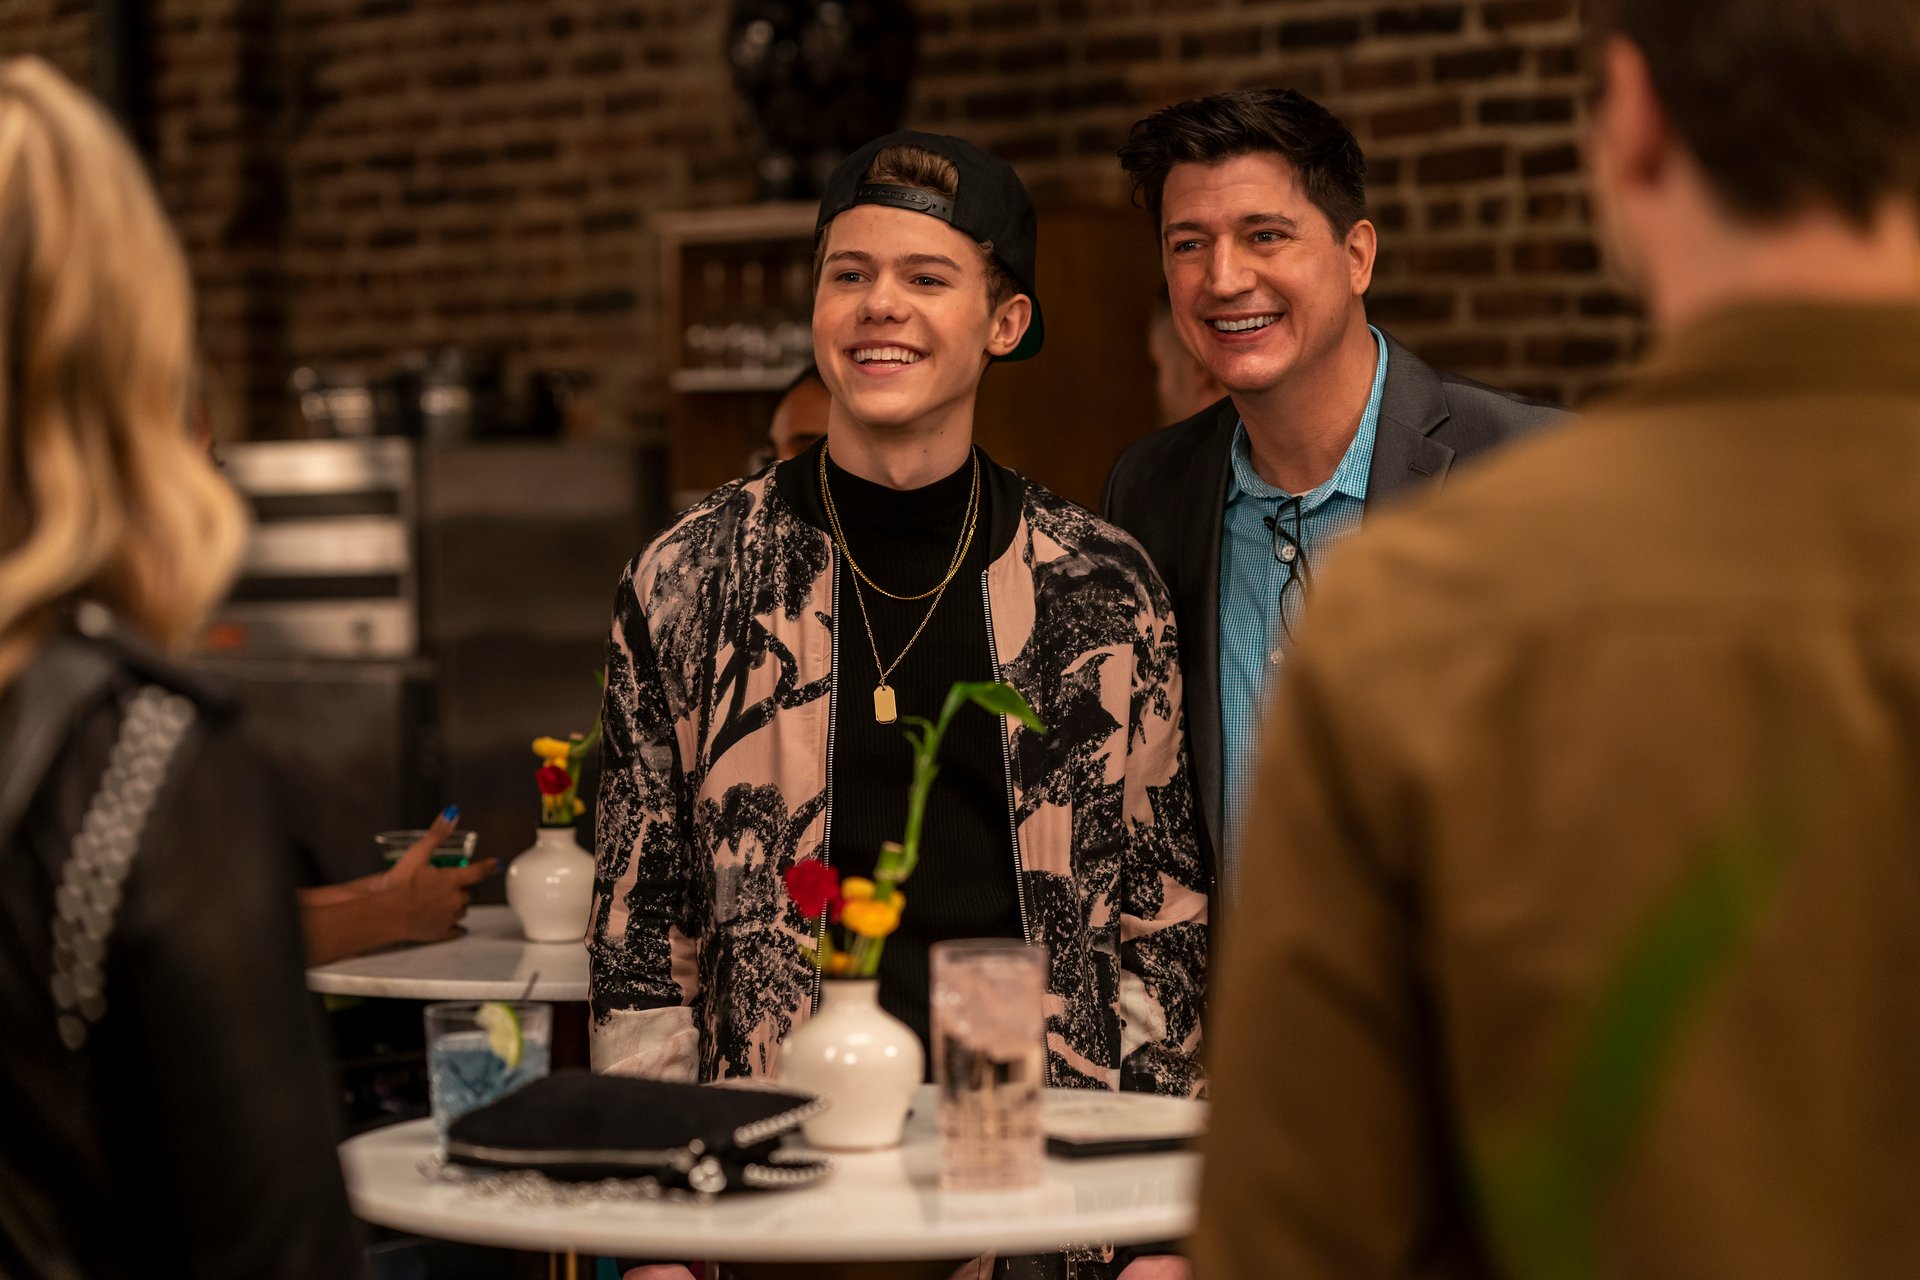 Case Walker and Ken Marino smile side by side in a restaurant in 'The Other Two.'